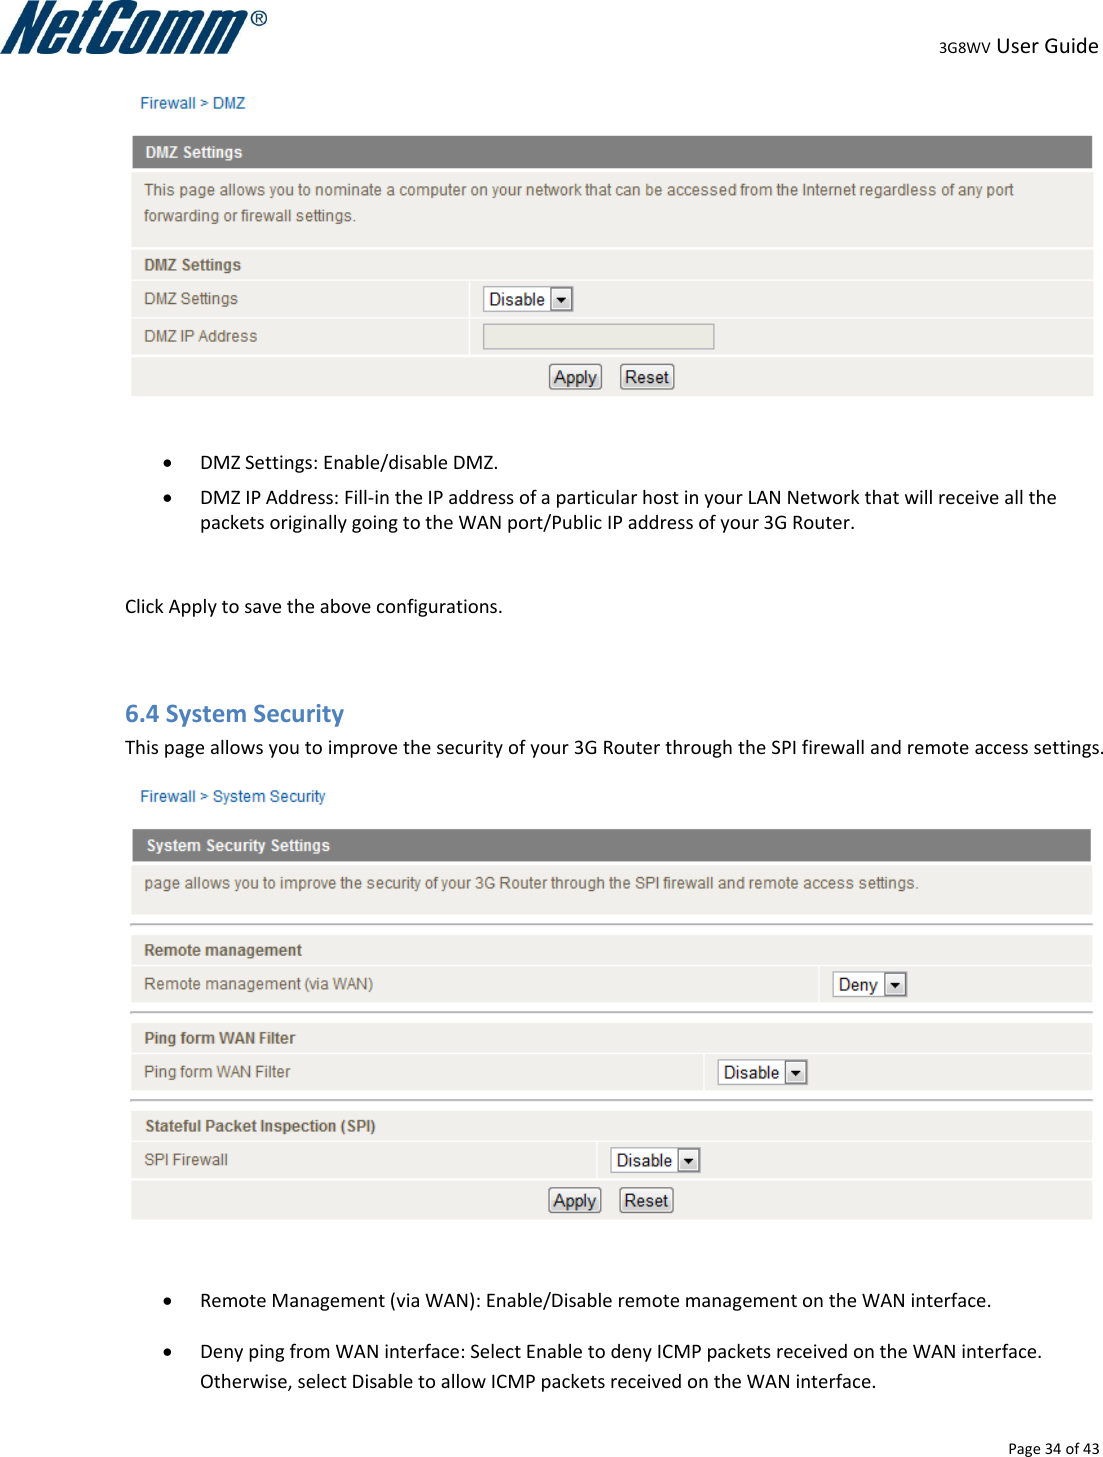                                                                                                                                                                                                                                                                                                                                                                                                3G8WV User Guide   Page 34 of 43     DMZ Settings: Enable/disable DMZ.  DMZ IP Address: Fill-in the IP address of a particular host in your LAN Network that will receive all the packets originally going to the WAN port/Public IP address of your 3G Router.  Click Apply to save the above configurations.  6.4 System Security This page allows you to improve the security of your 3G Router through the SPI firewall and remote access settings.    Remote Management (via WAN): Enable/Disable remote management on the WAN interface.  Deny ping from WAN interface: Select Enable to deny ICMP packets received on the WAN interface. Otherwise, select Disable to allow ICMP packets received on the WAN interface. 